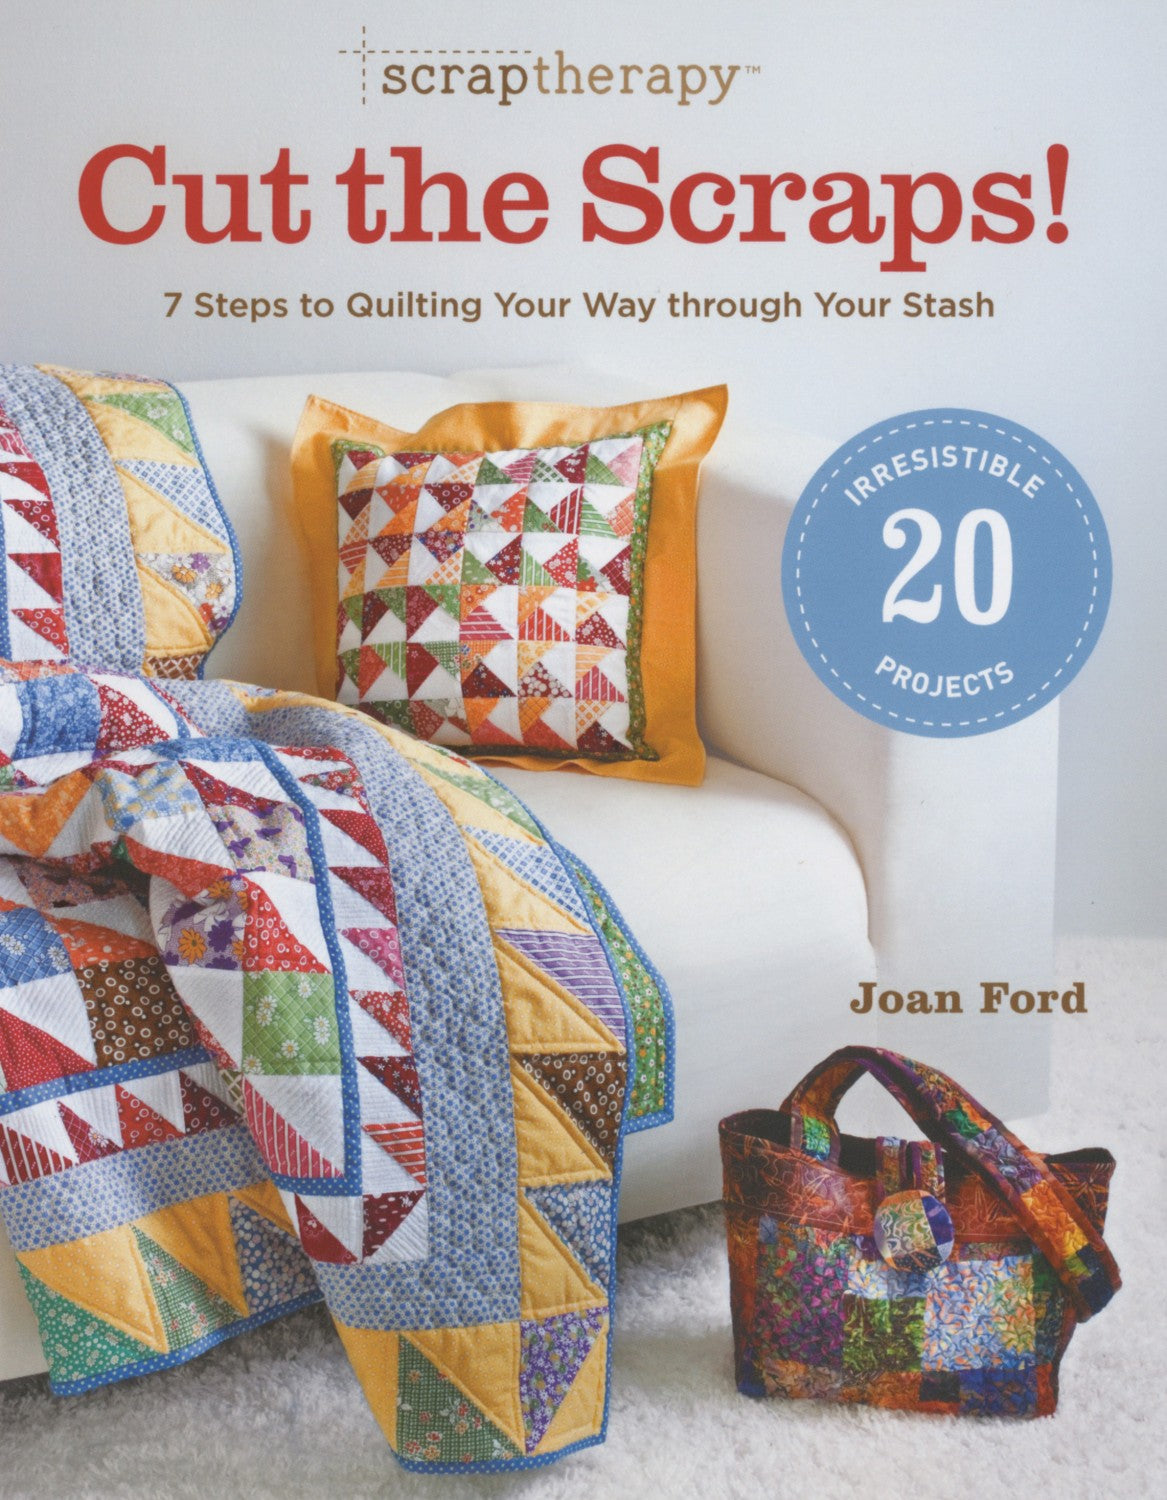 Cut the Scraps! by Joan Ford